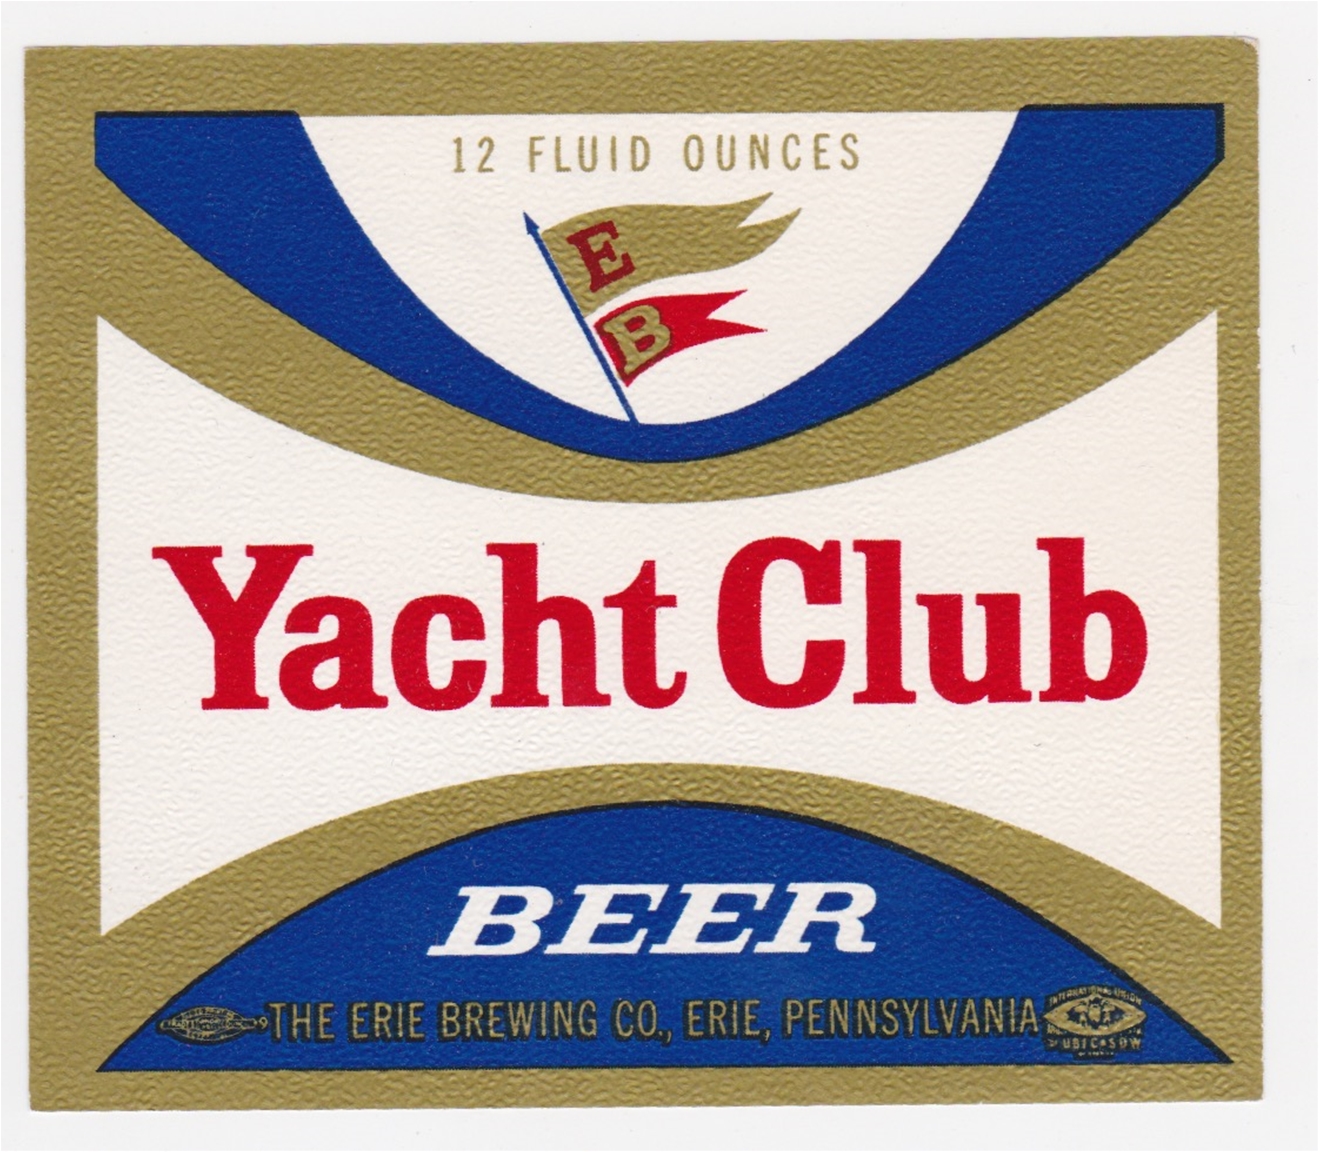 Yacht Club Beer Label